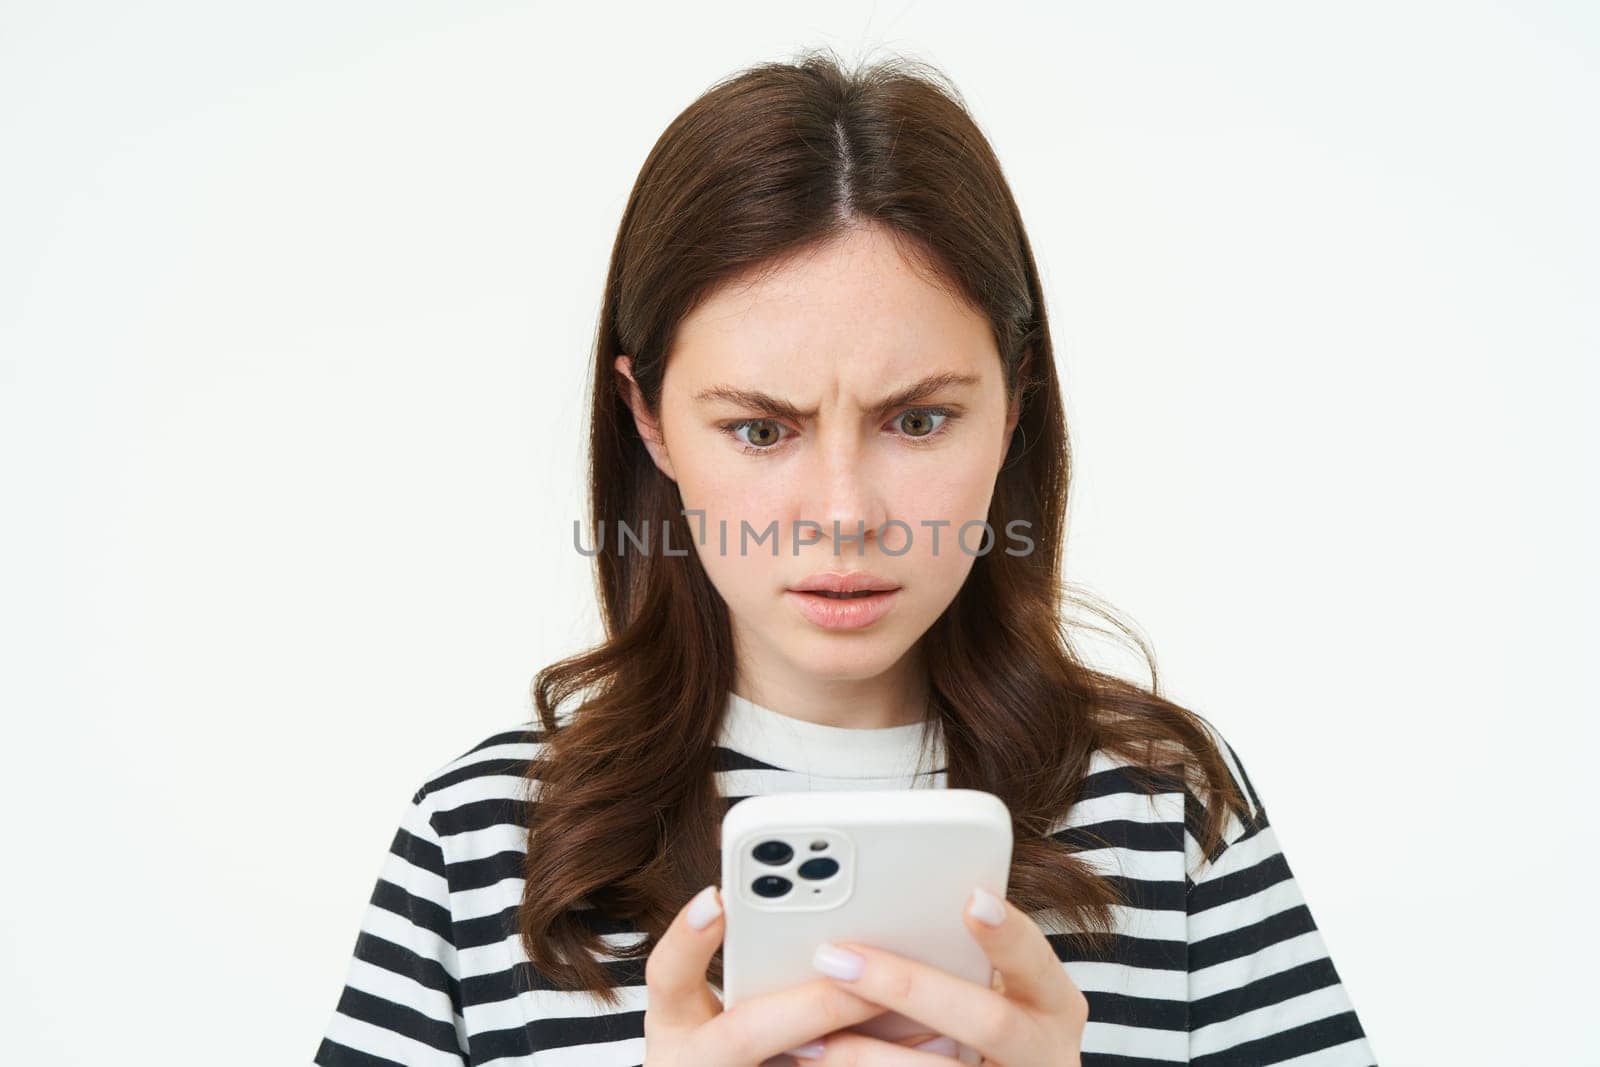 Woman looking confused and shocked at smartphone screen, frowning, reading upsetting, concerining news on mobile phone, isolated on white background.